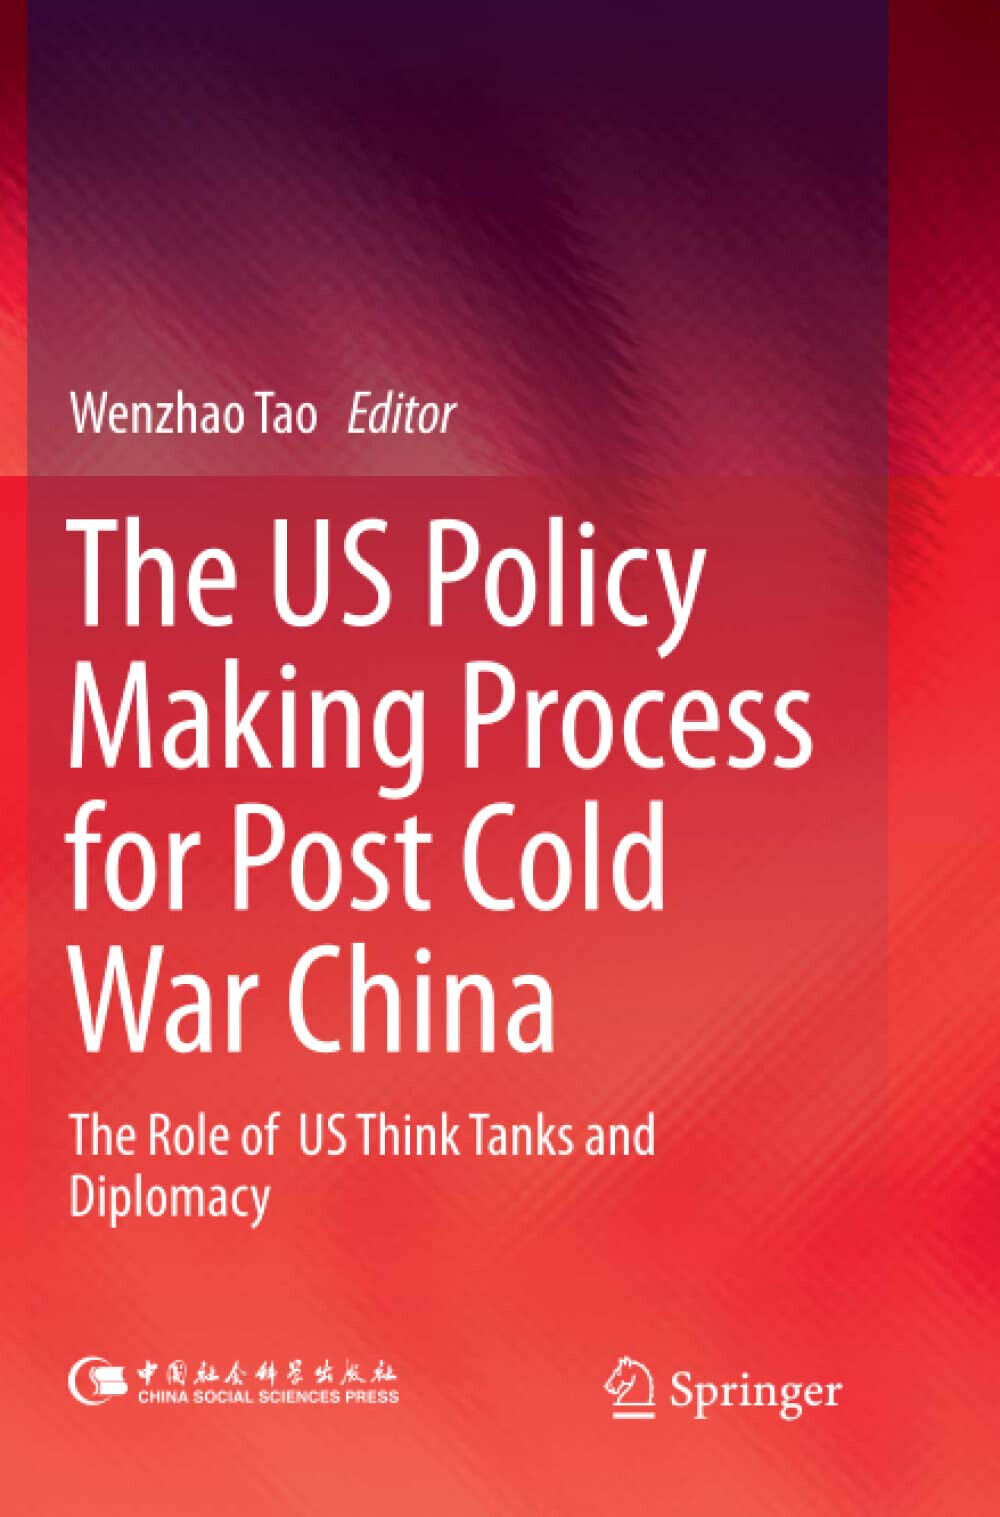 The US Policy Making Process for Post Cold War China - Wenzhao Tao - 2019